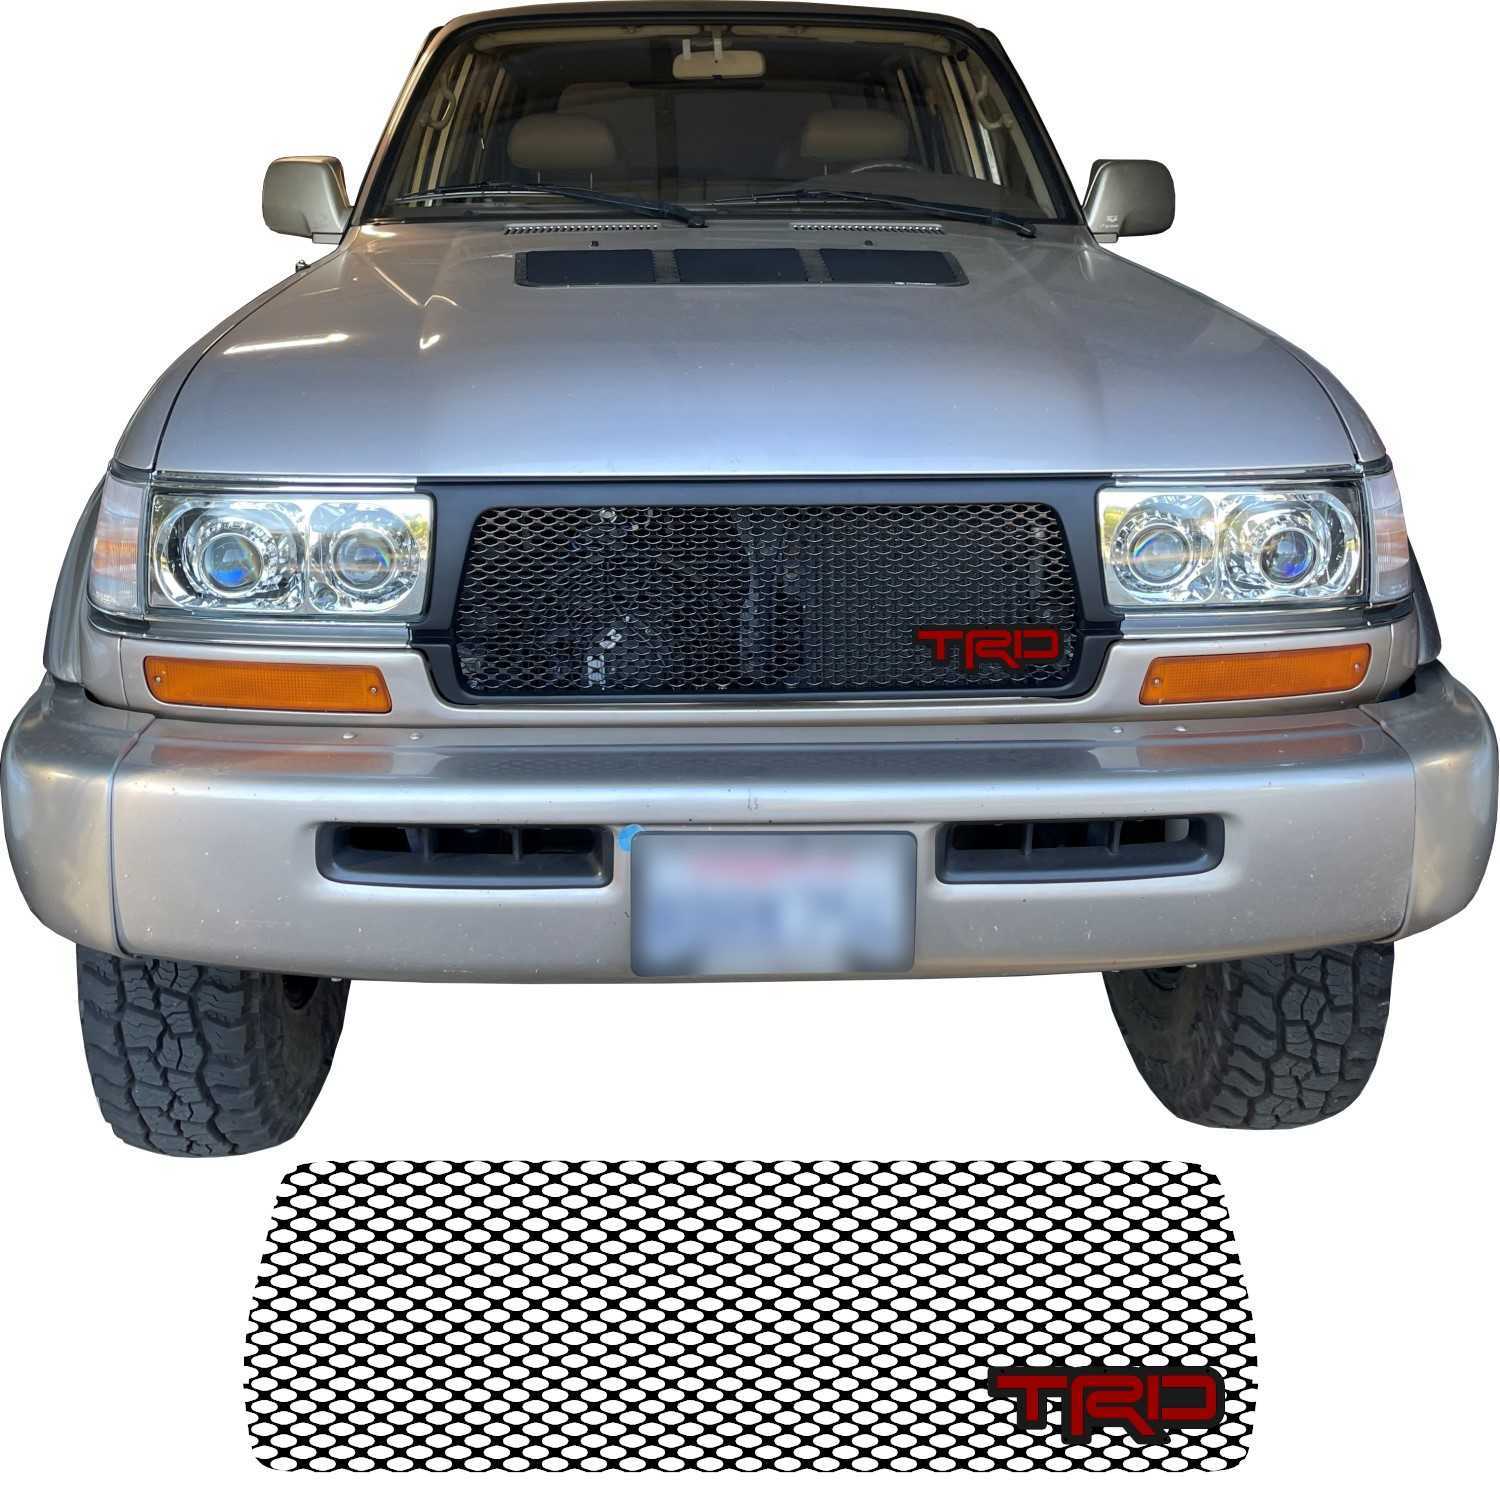 1995 - 1997 Toyota Land Cruiser Series 80 Grill Mesh and TRD Emblem